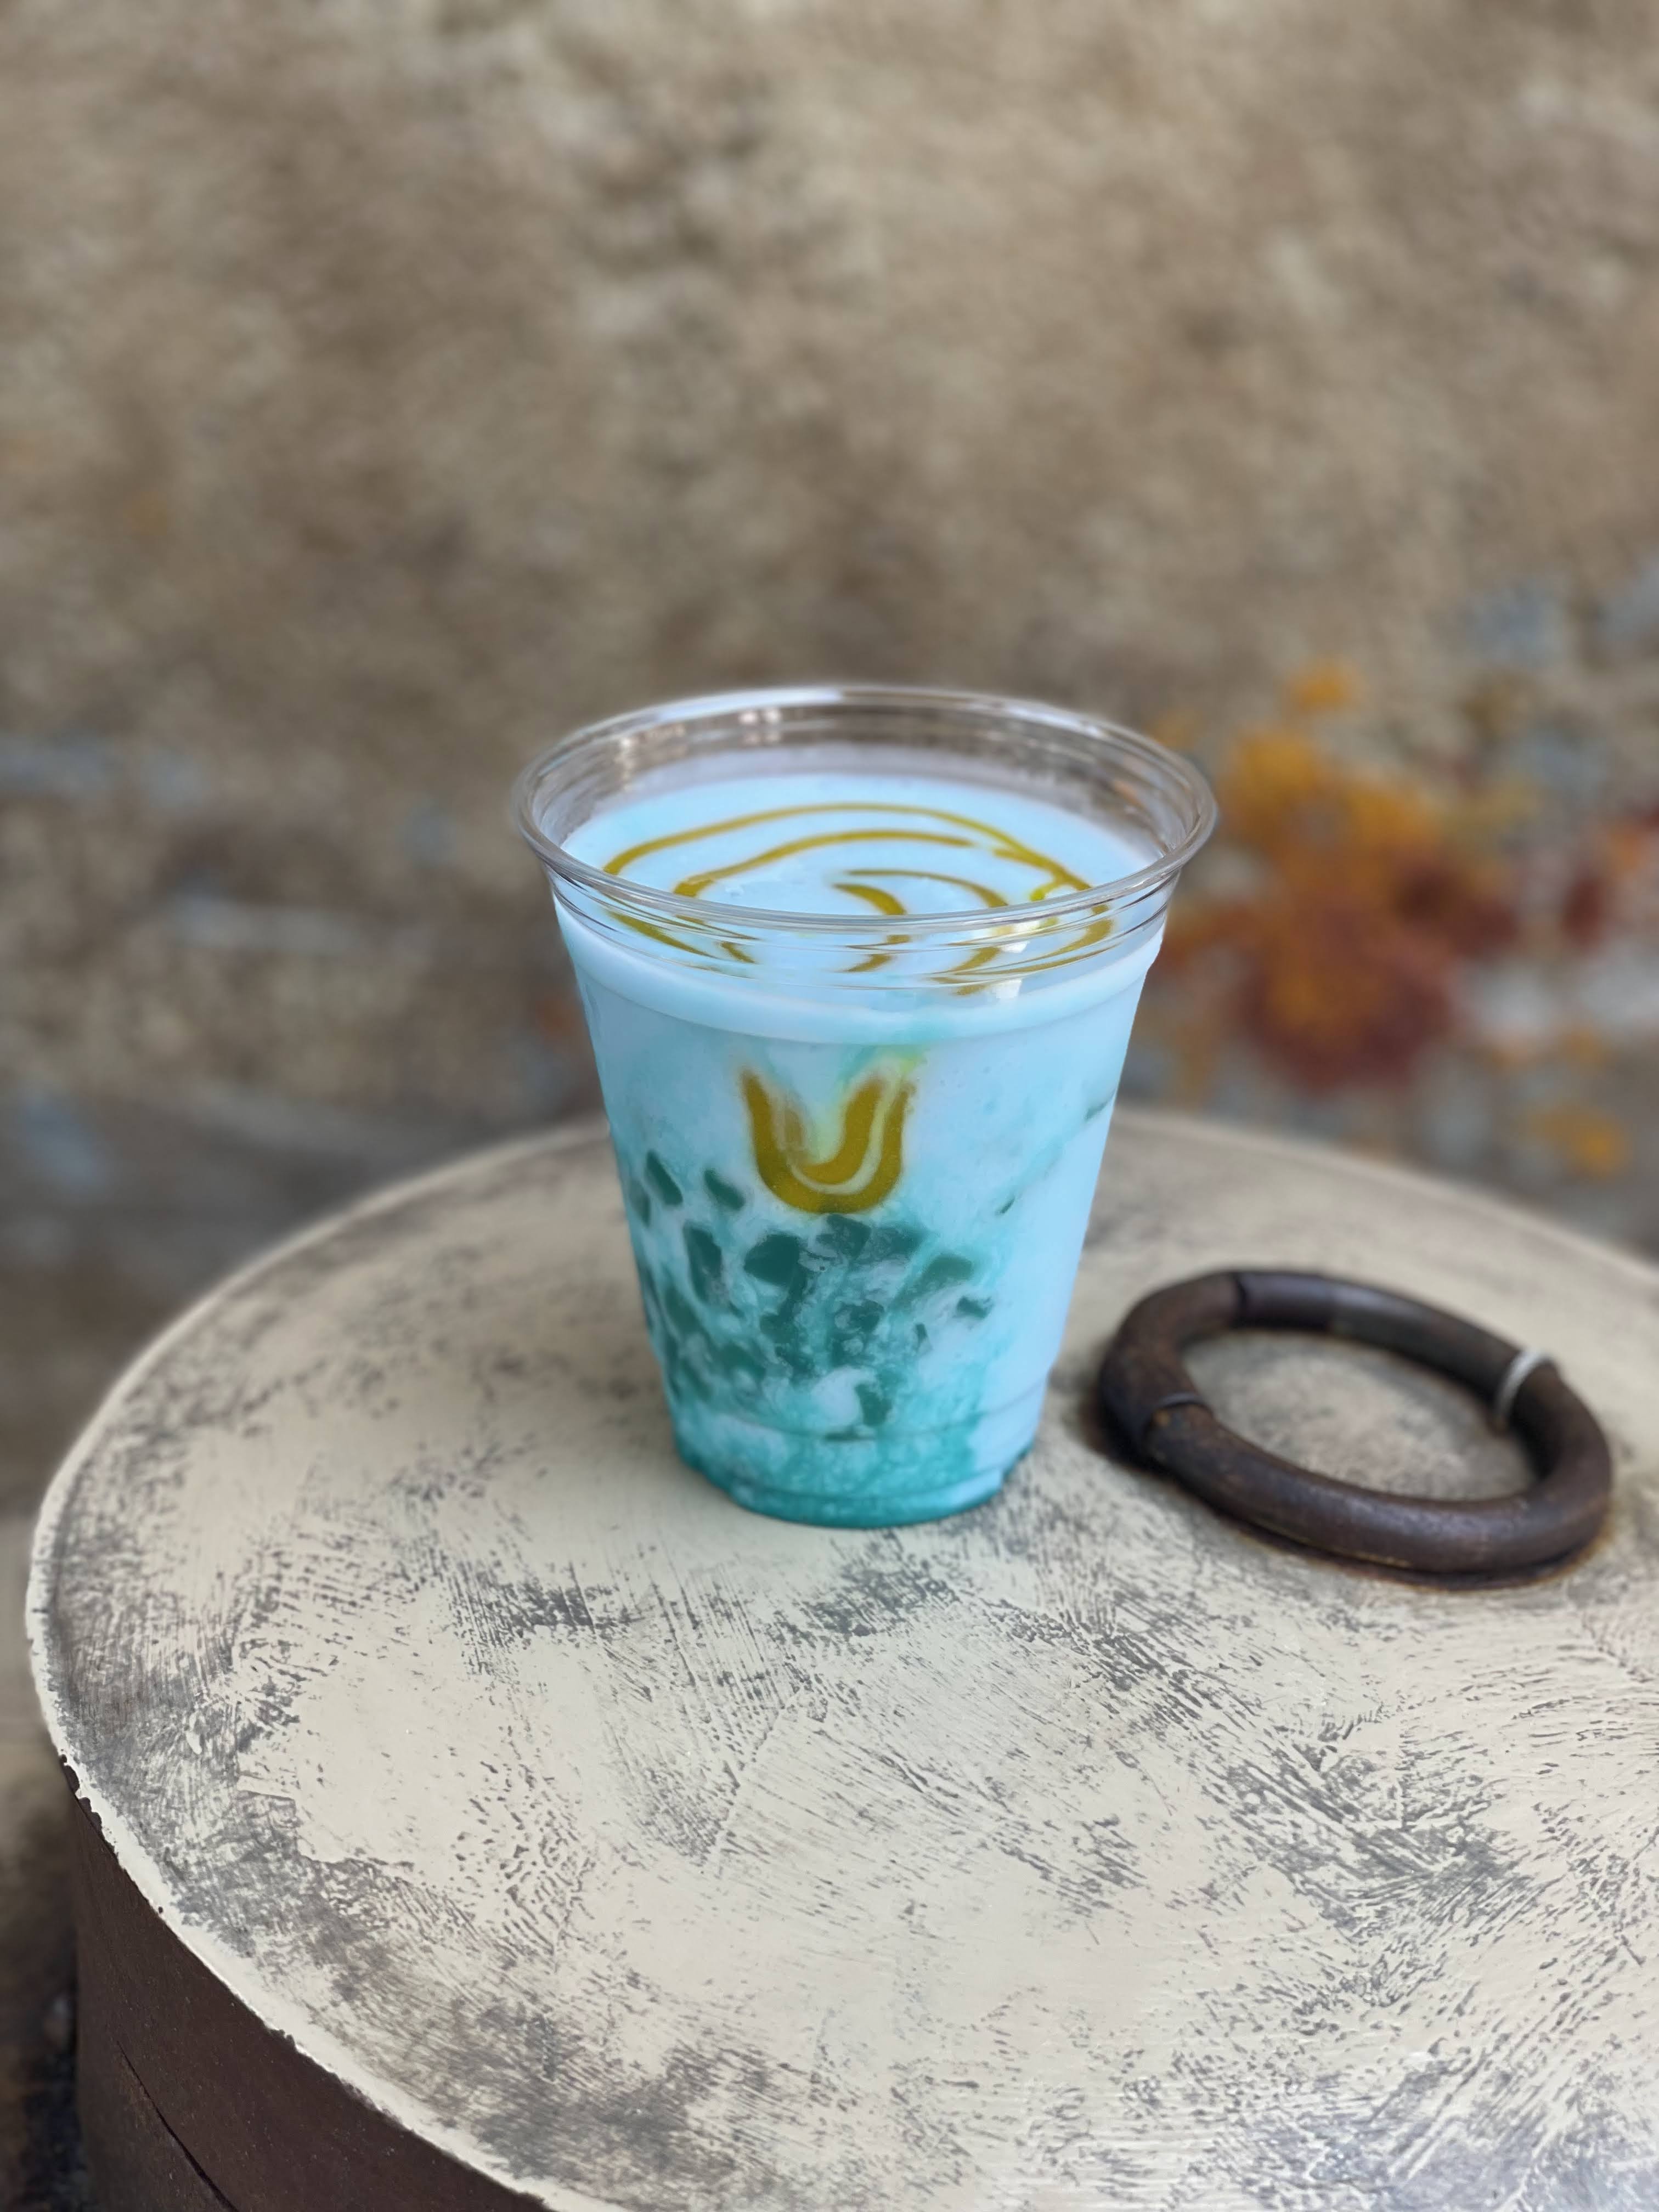 A plastic cup filled with blue milk and glittery gel.